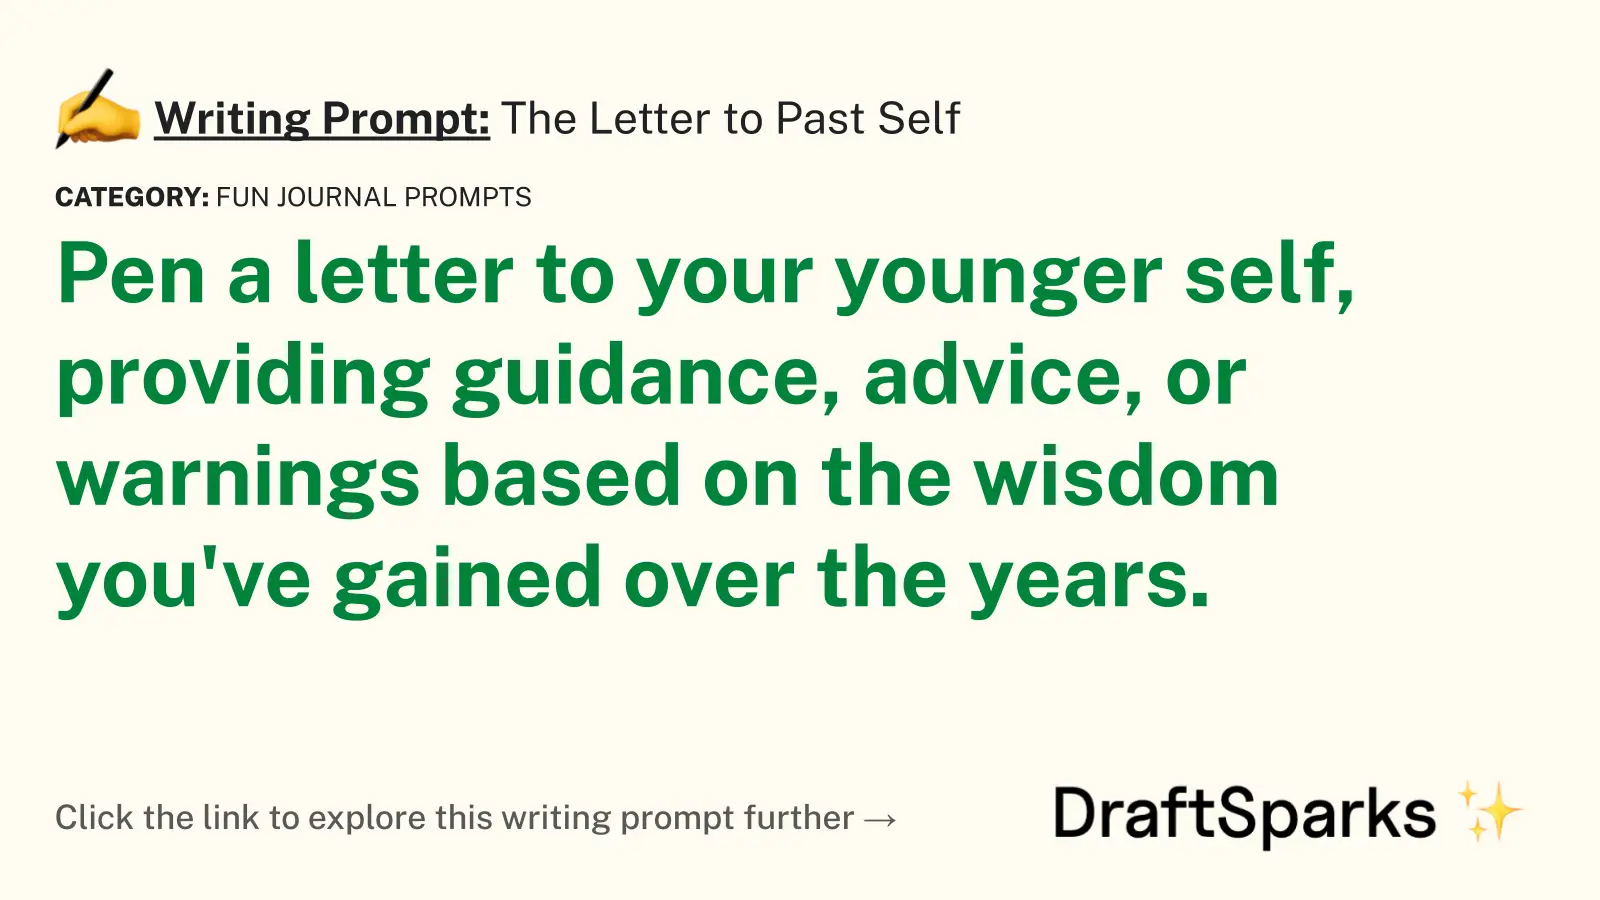 The Letter to Past Self